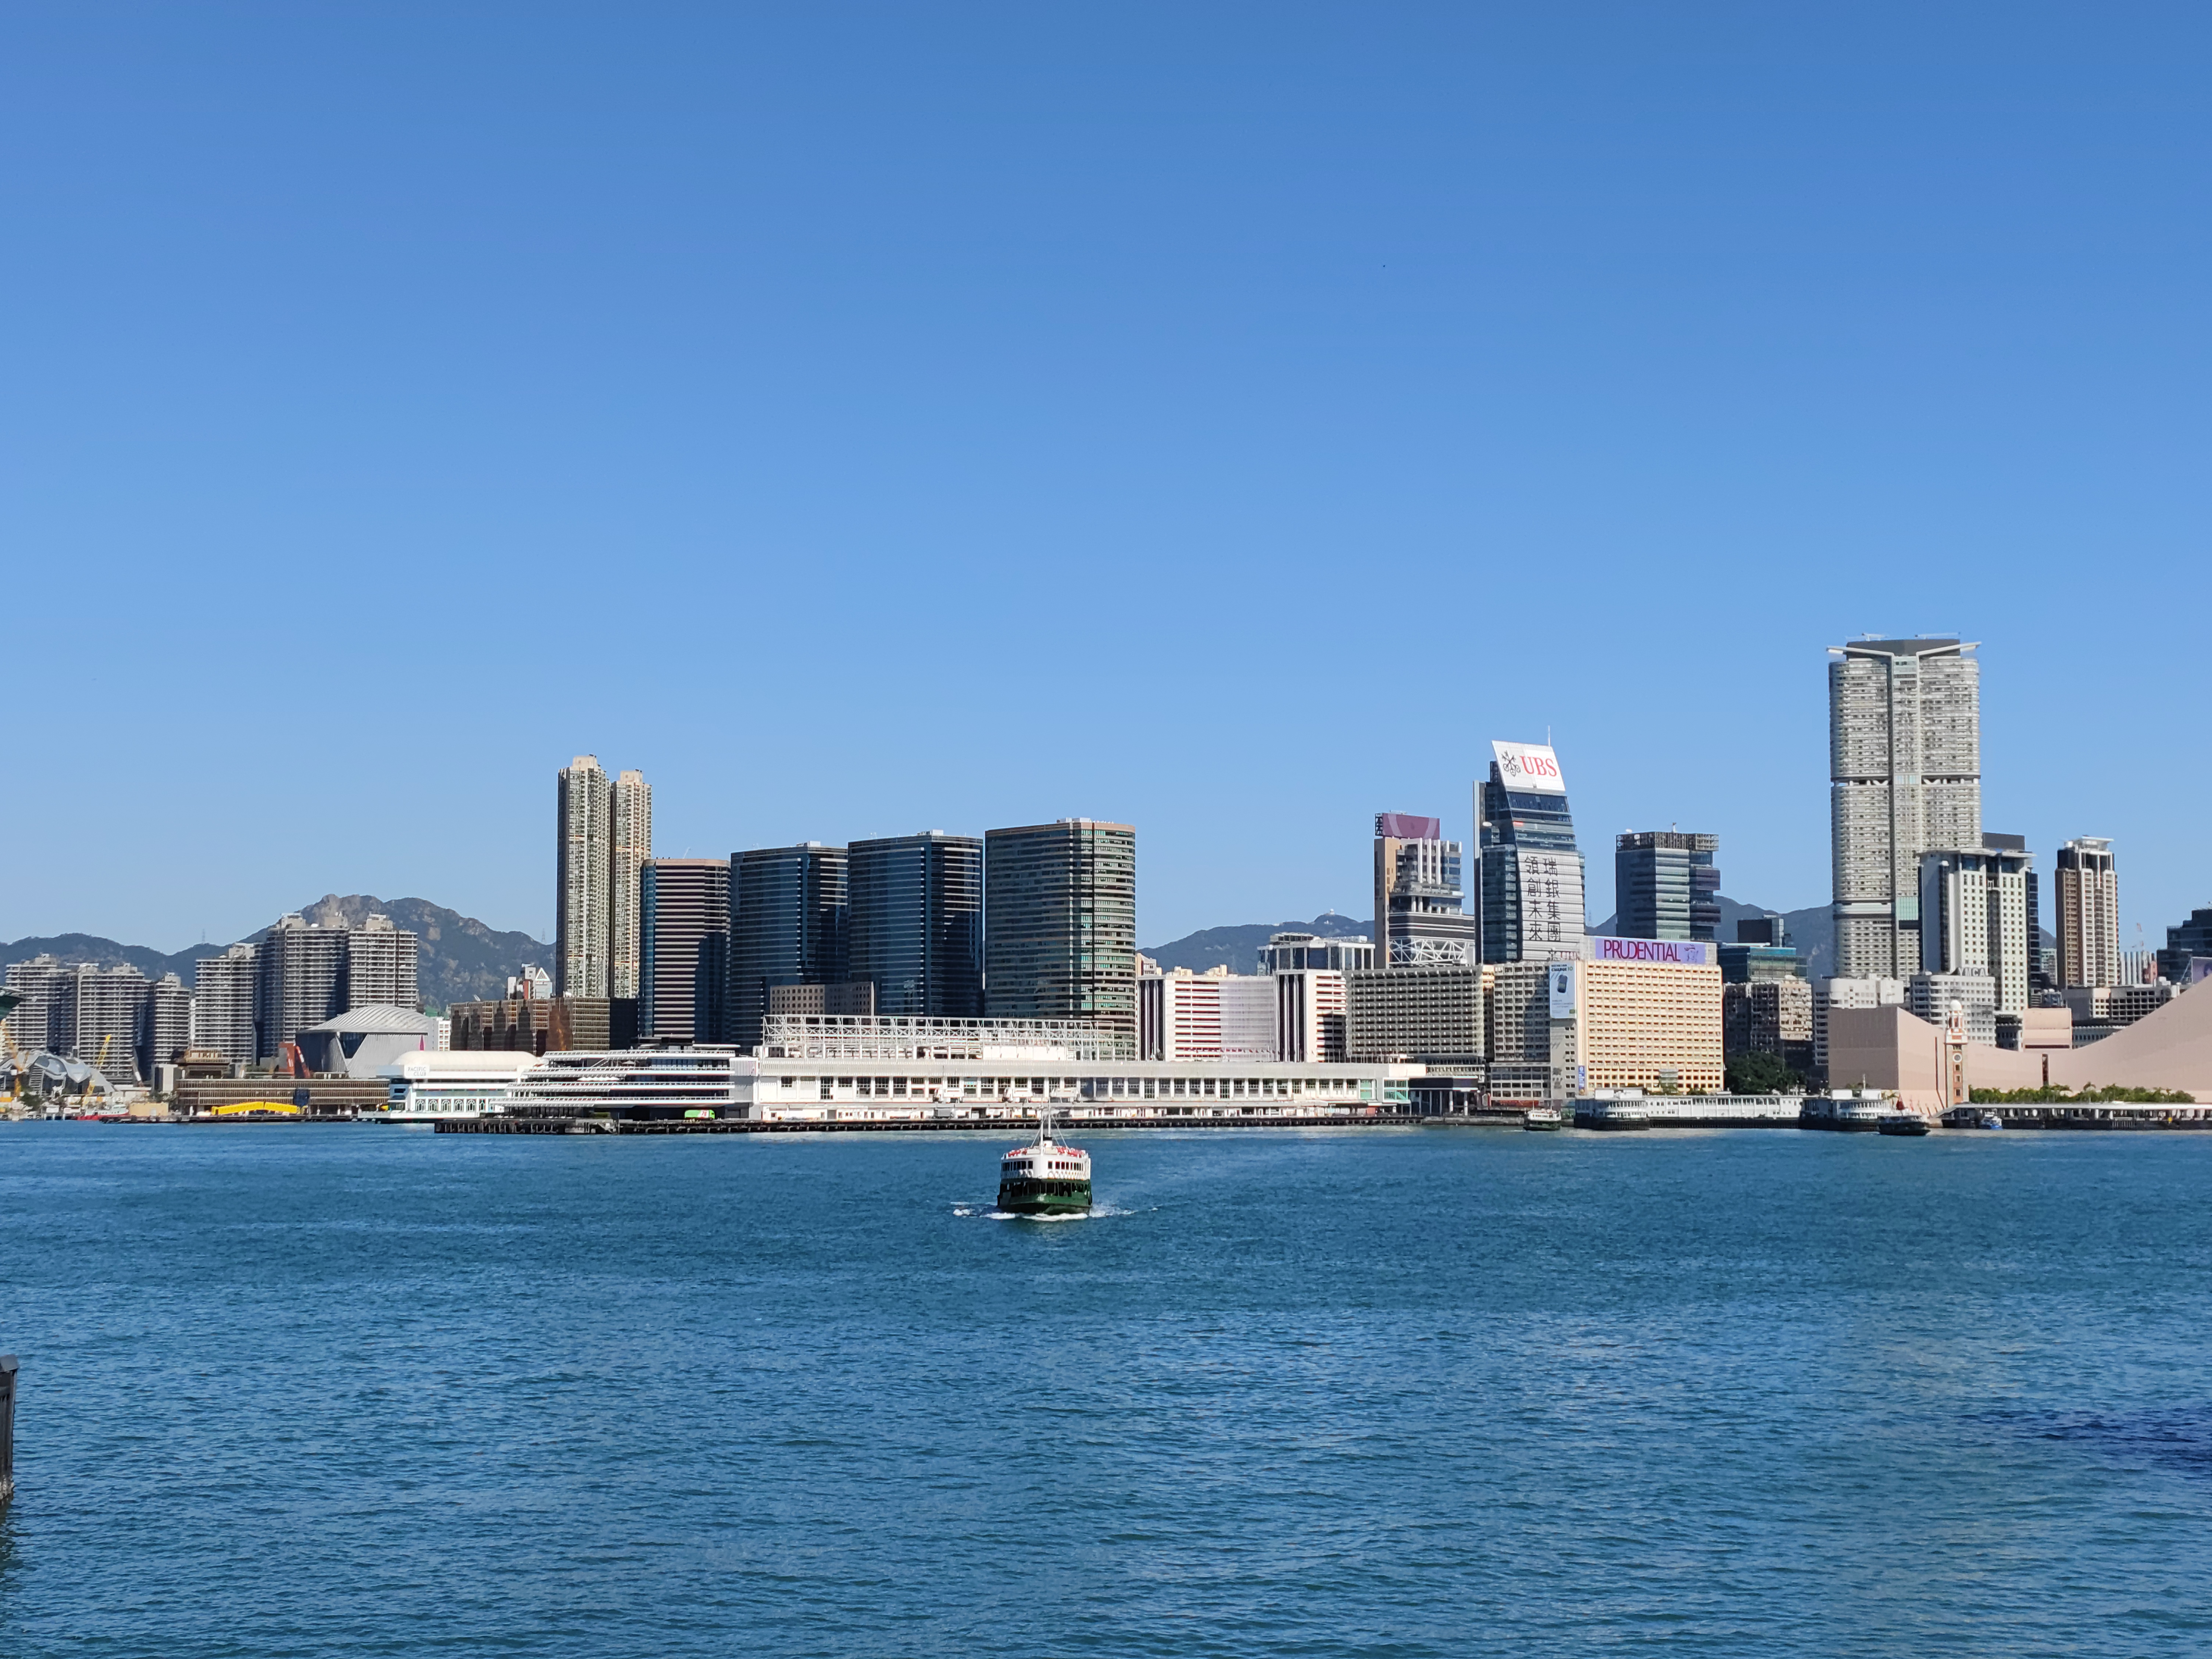 On the left is the iconic and historical cruise terminal in Hong Kong, Ocean Terminal in Tsim Sha Tsui, Kowloon, Hong Kong. The Harbour City, a commercial, shopping and residential complex, is attached to the Ocean Terminal. At the tip of Kowloon Peninsula (in the centre) are the piers of the Star Ferry for crossing the iconic Victoria Harbour.